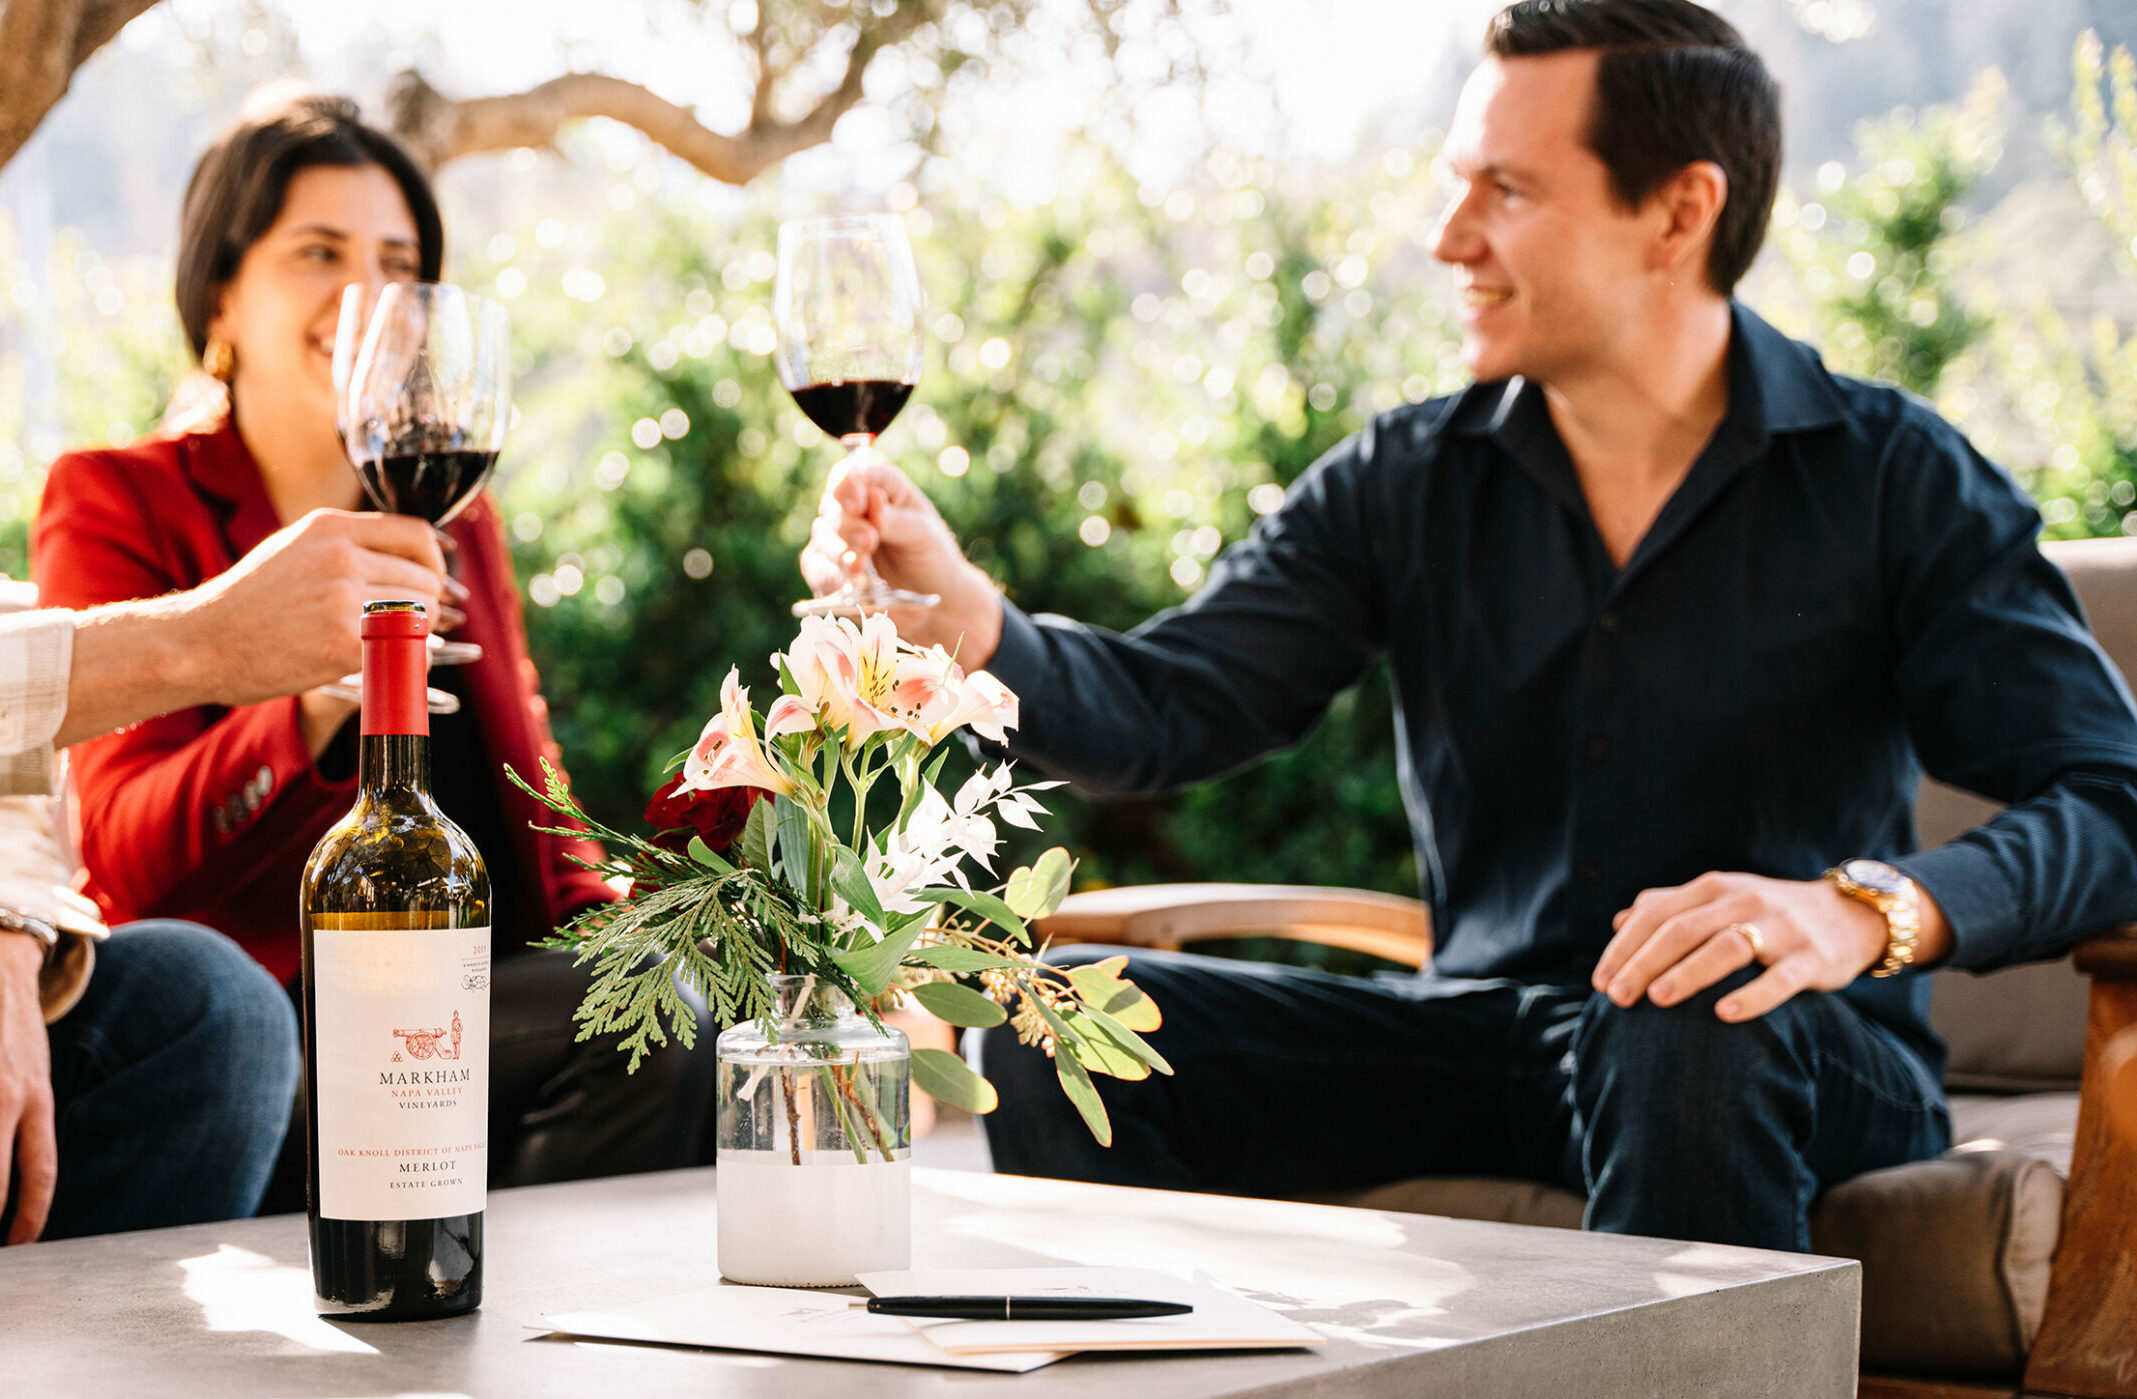 people toasting red wine glasses with bottle of Markham Merlot on table